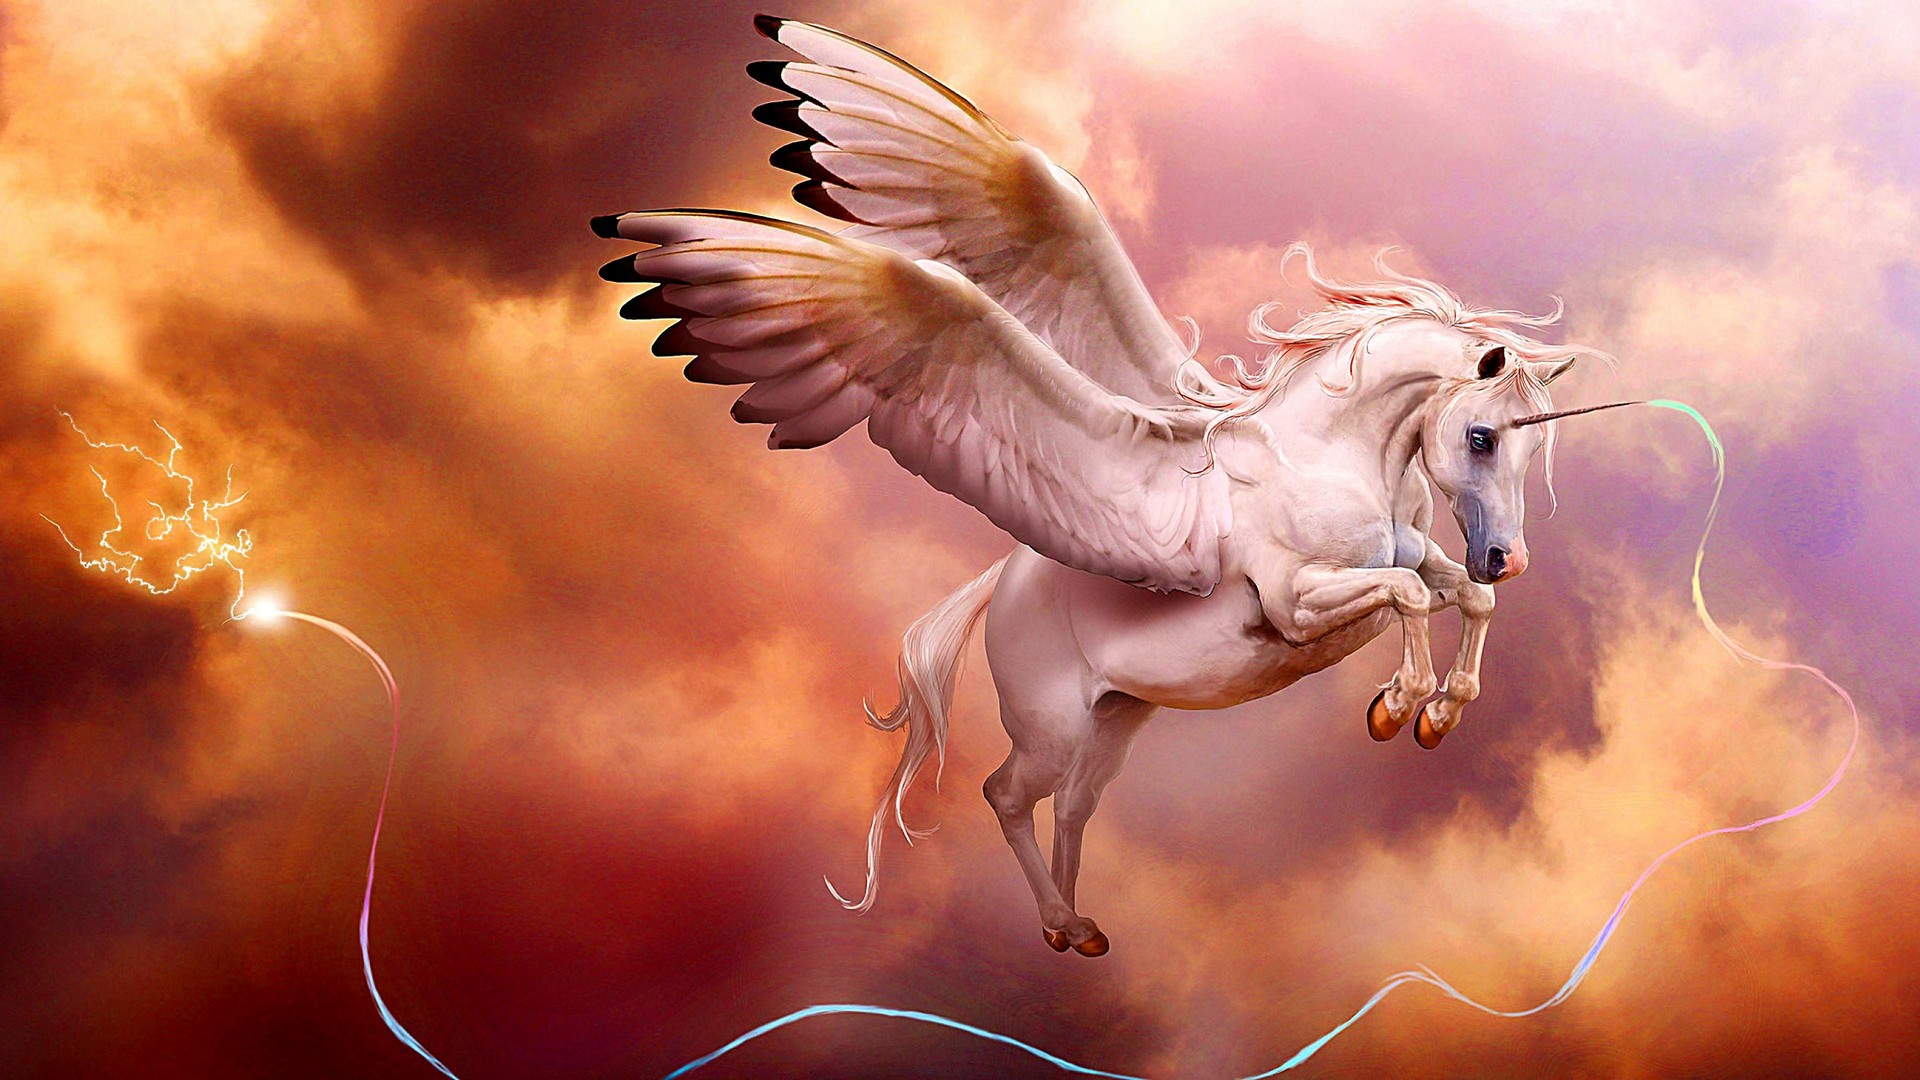 Wallpaper HD Unicorn With high-resolution 1920X1080 pixel. You can use this wallpaper for your Desktop Computer Backgrounds, Mac Wallpapers, Android Lock screen or iPhone Screensavers and another smartphone device